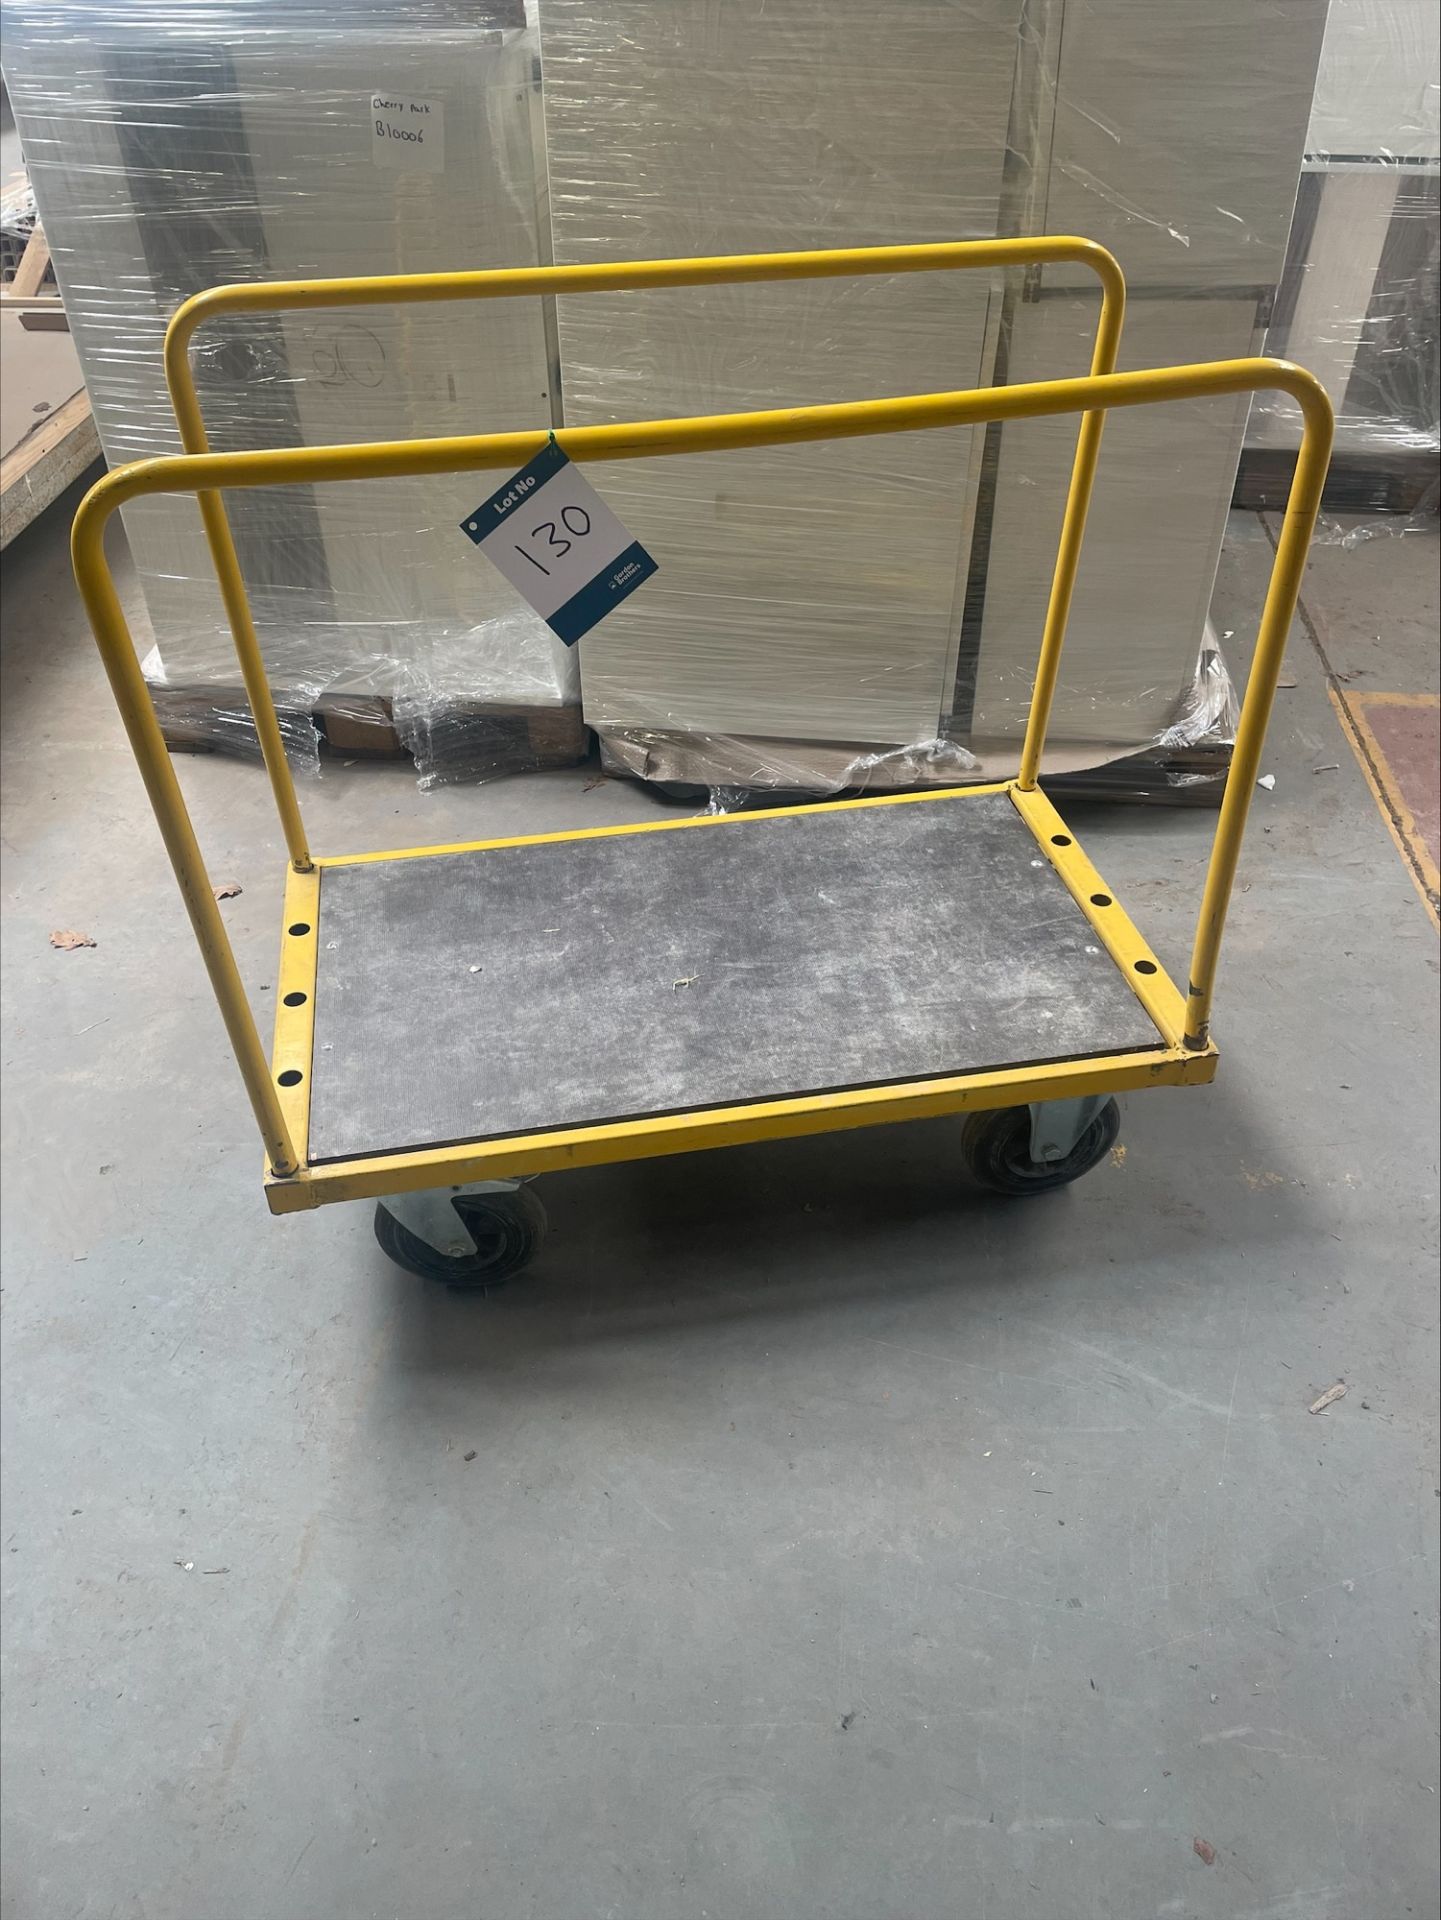 4 Wheeled stock trolley, approx. 1070mm x 600mm x 1020mm (Including handrails)